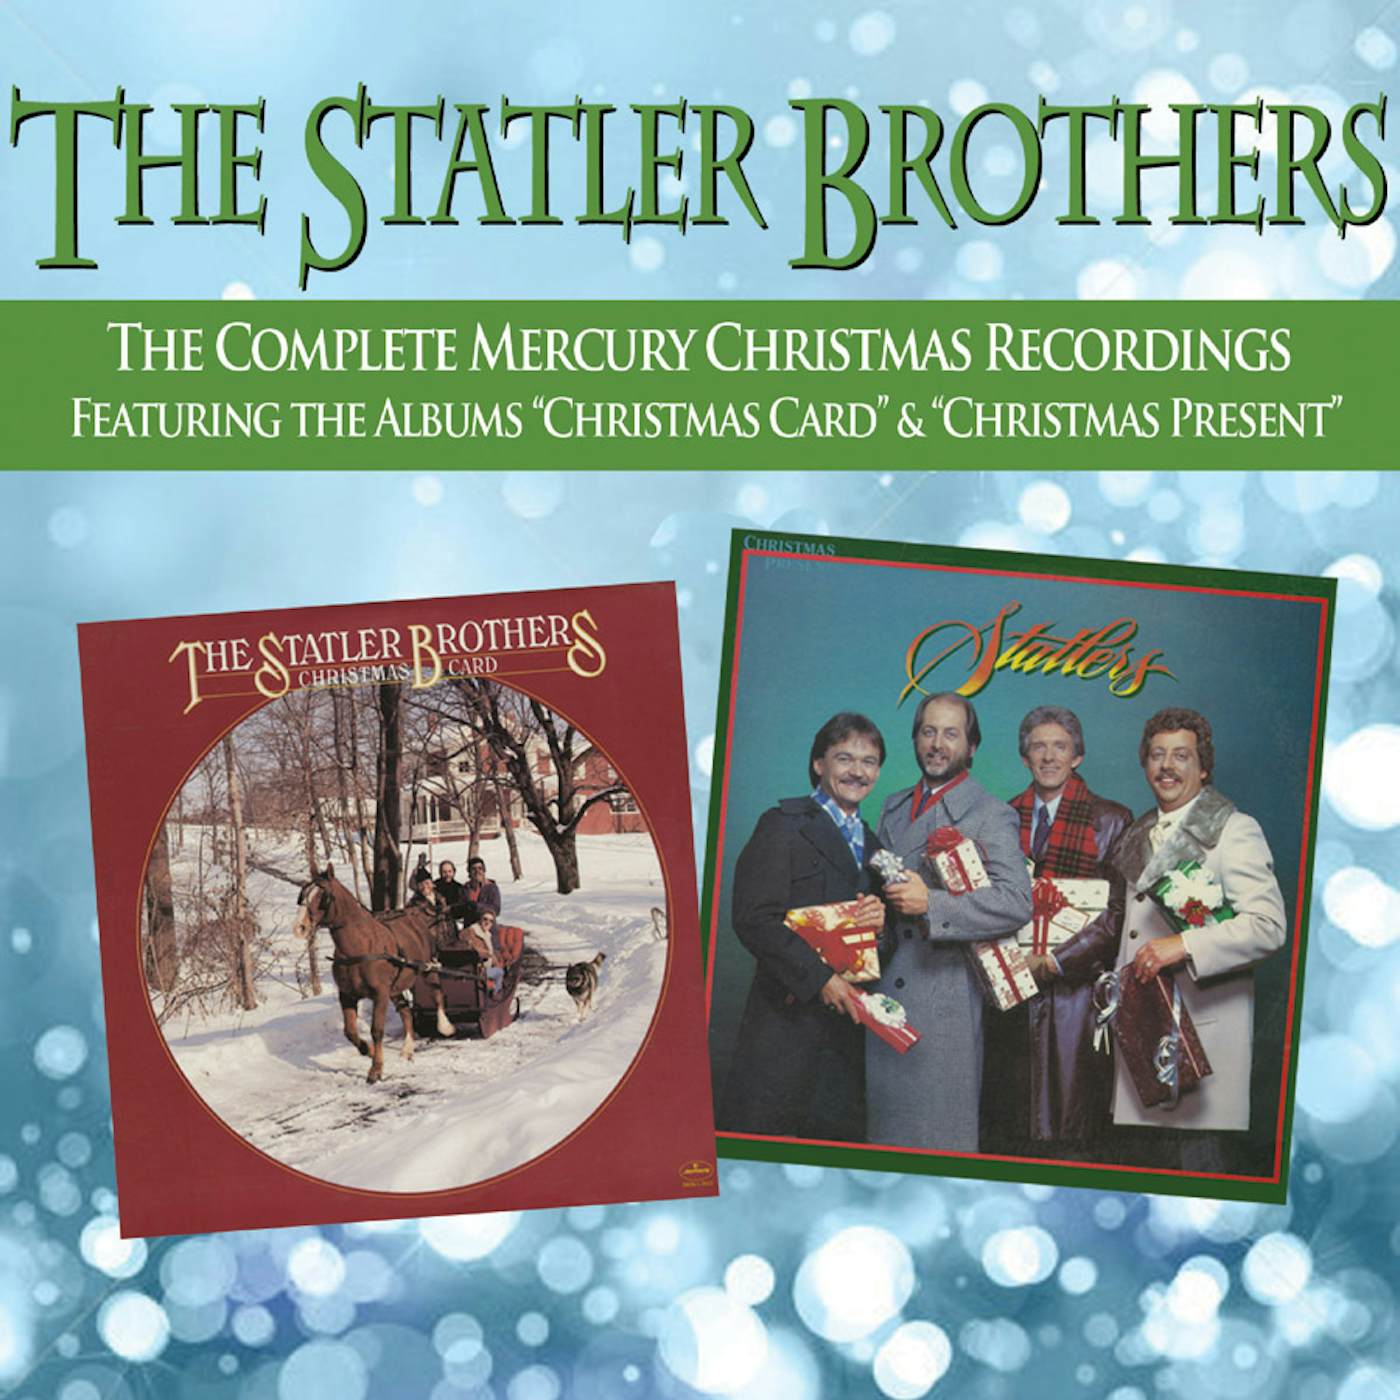 The Statler Brothers COMPLETE CHRISTMAS RECORDINGS CD